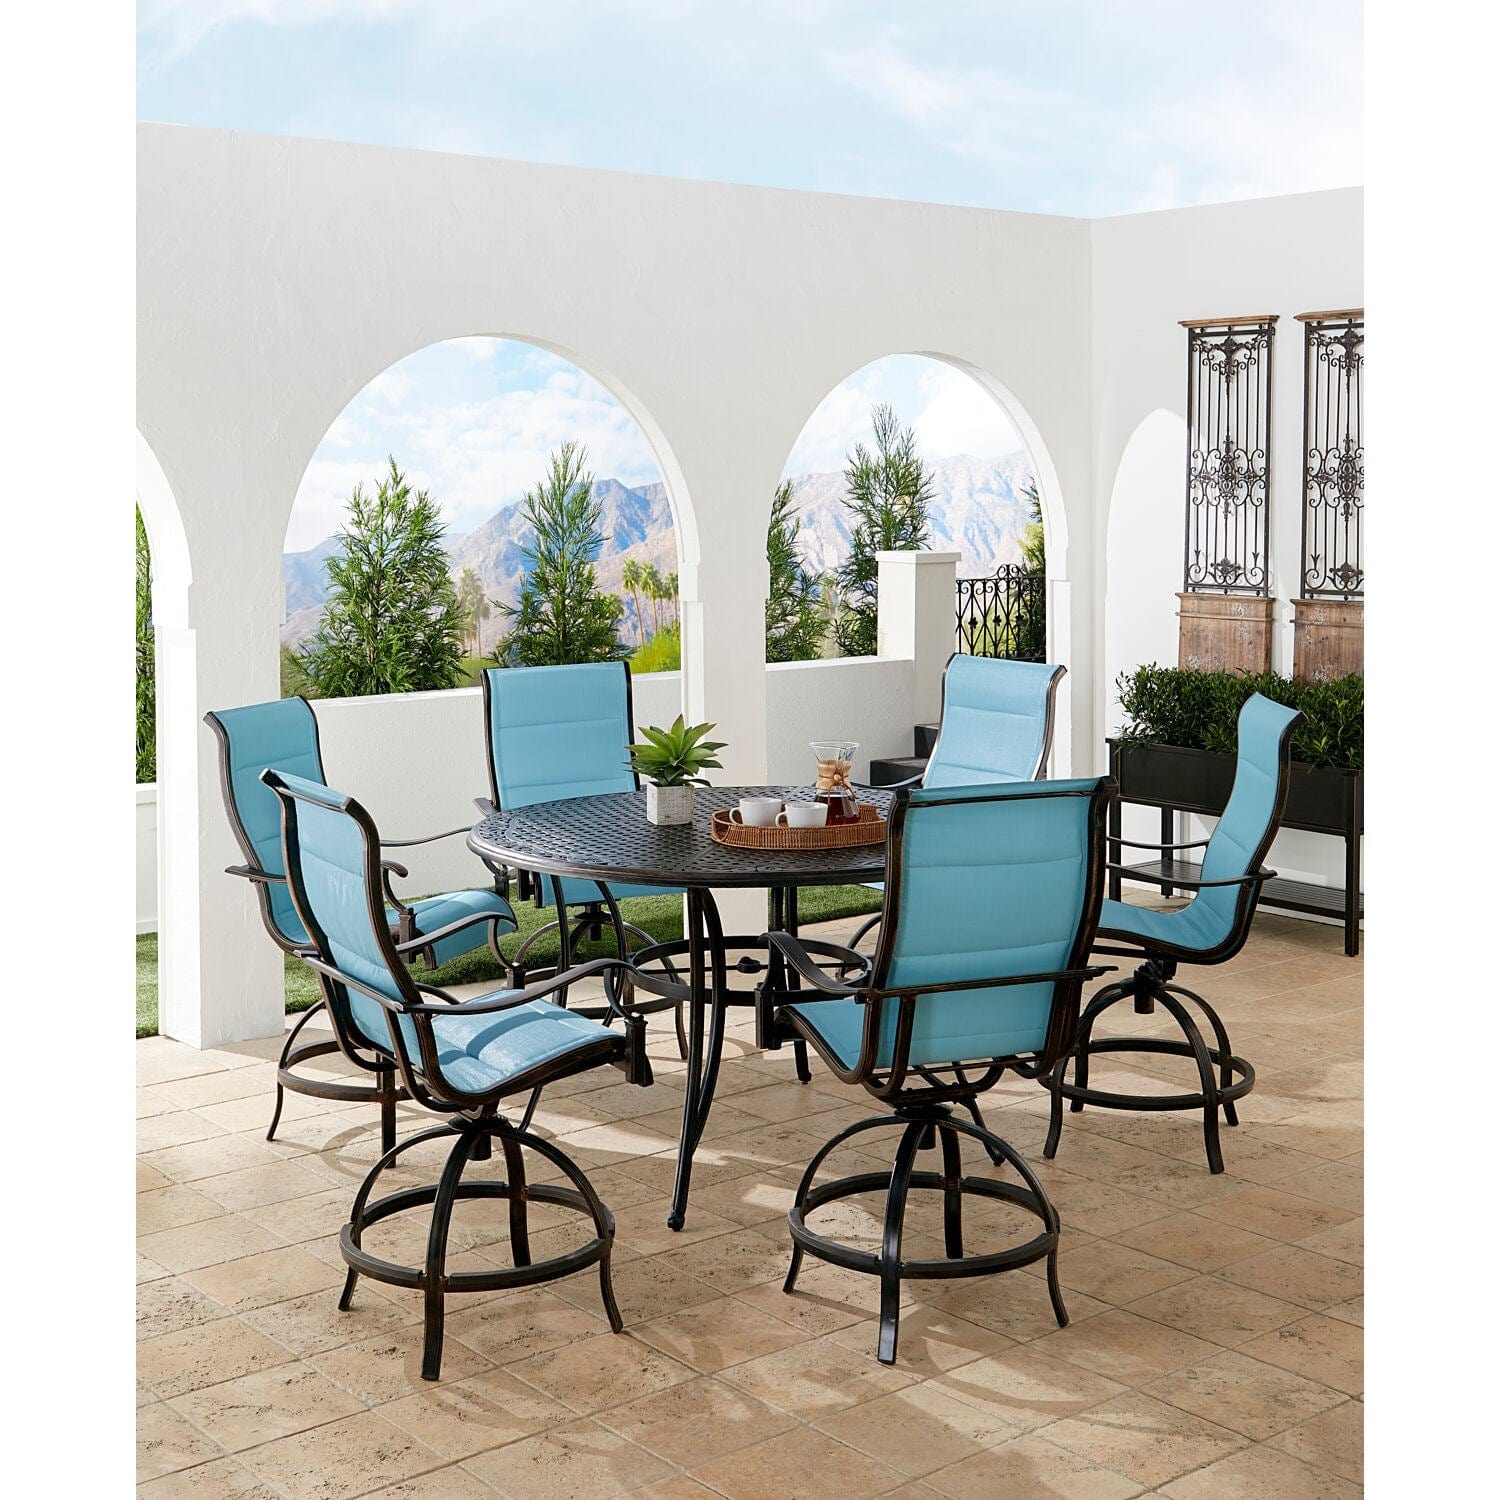 Hanover Outdoor Dining Set Hanover - Traditions 7-Piece Aluminum Frame High-Dining Set in Blue with 6 Padded Swivel Counter-Height Chairs and 56-in. Cast-top Table | TRADDN7PCPDBR-BLU